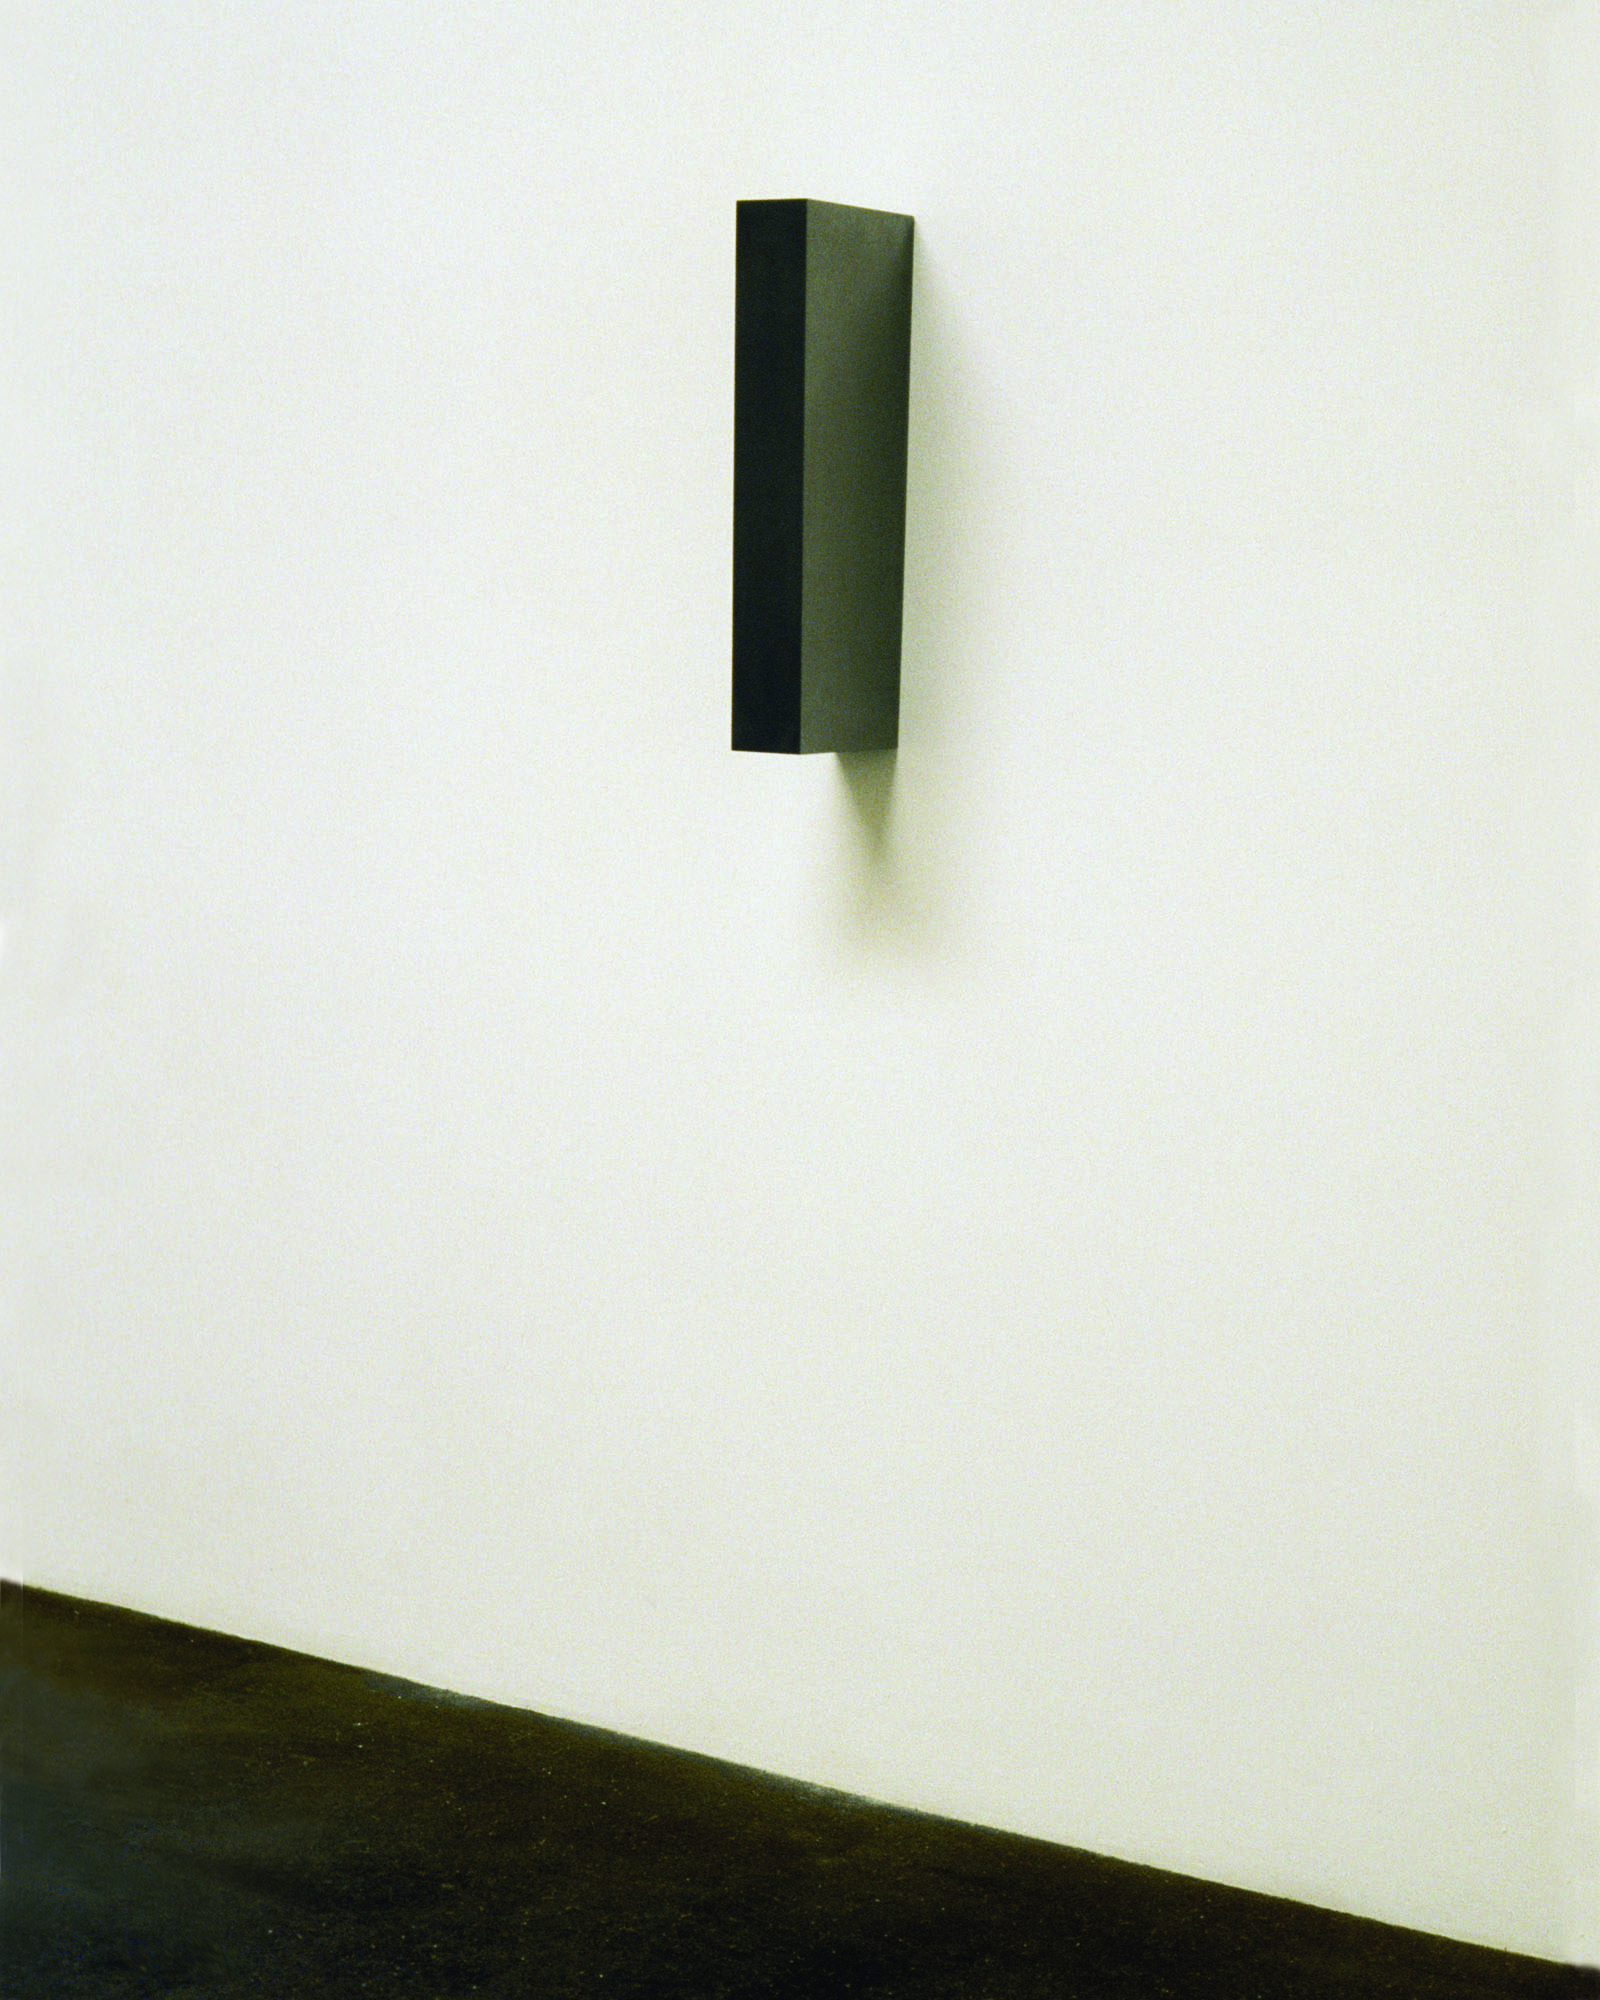   Untitled (Asymmetrical Form no. 4), 2007  Solid graphite,&nbsp;21.06” x 3.25” x 8.06” 